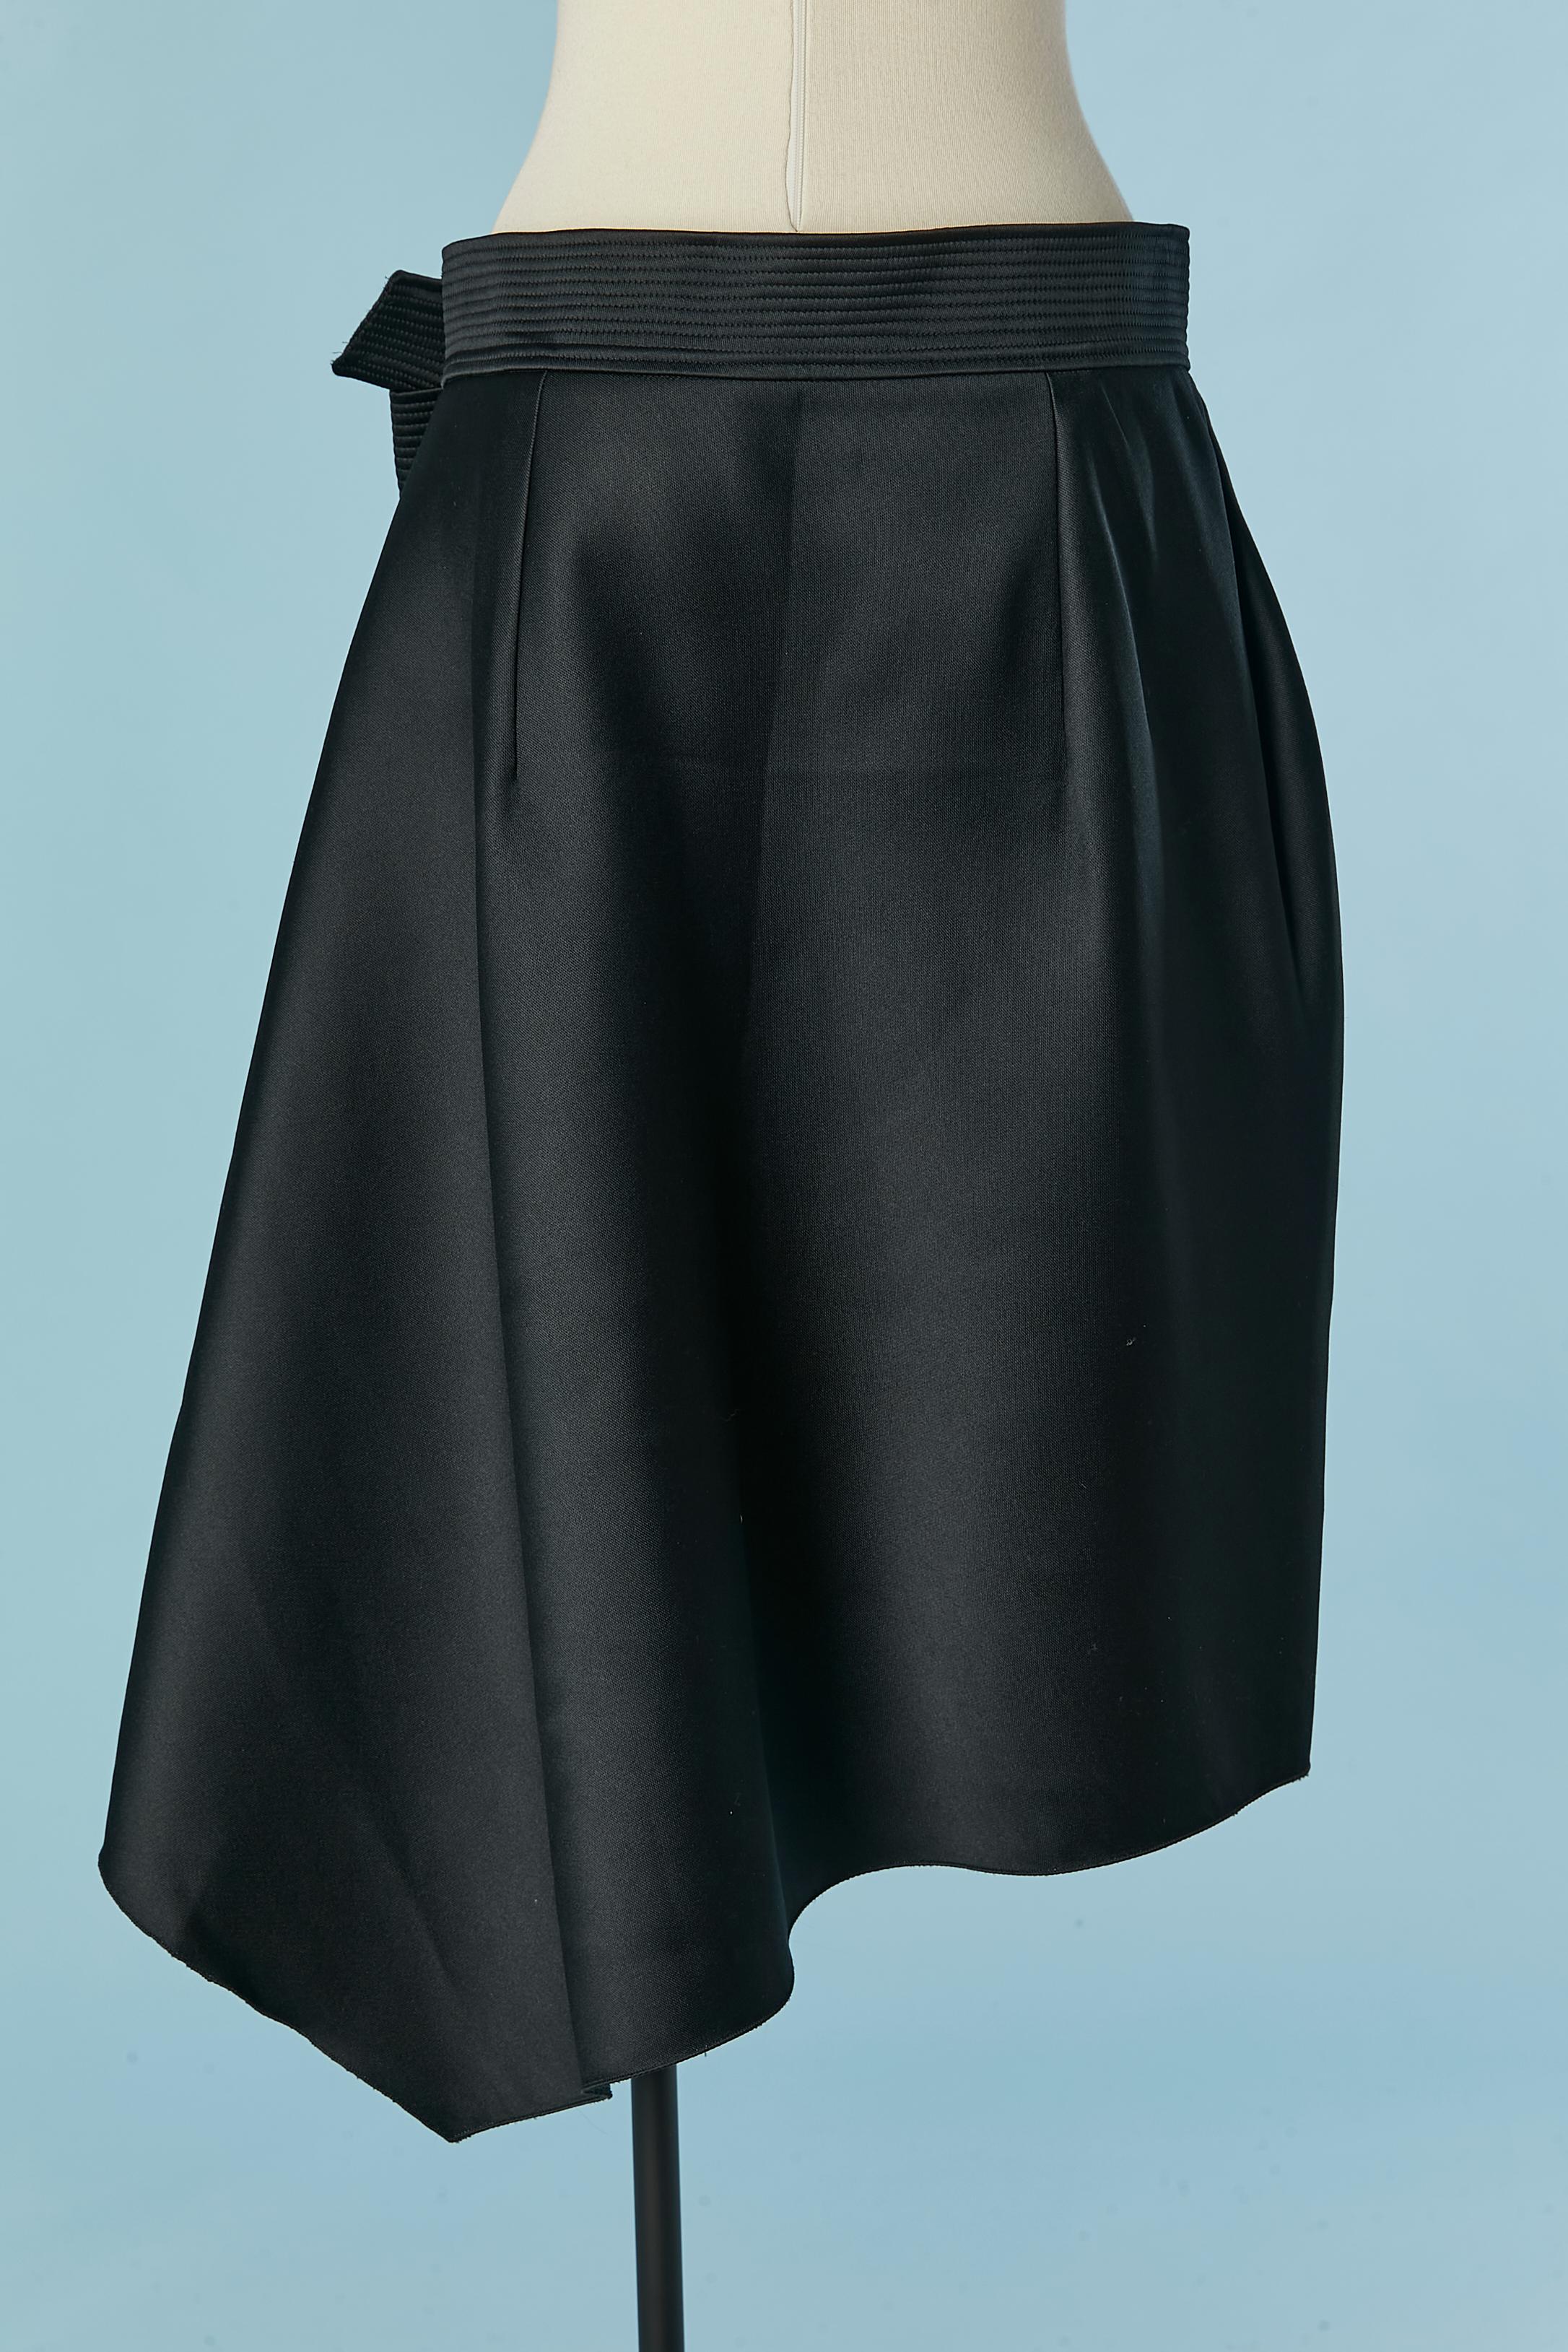 Women's Black asymmetrical wrap skirt with bow Lanvin by Alber Elbaz SS 2013 For Sale